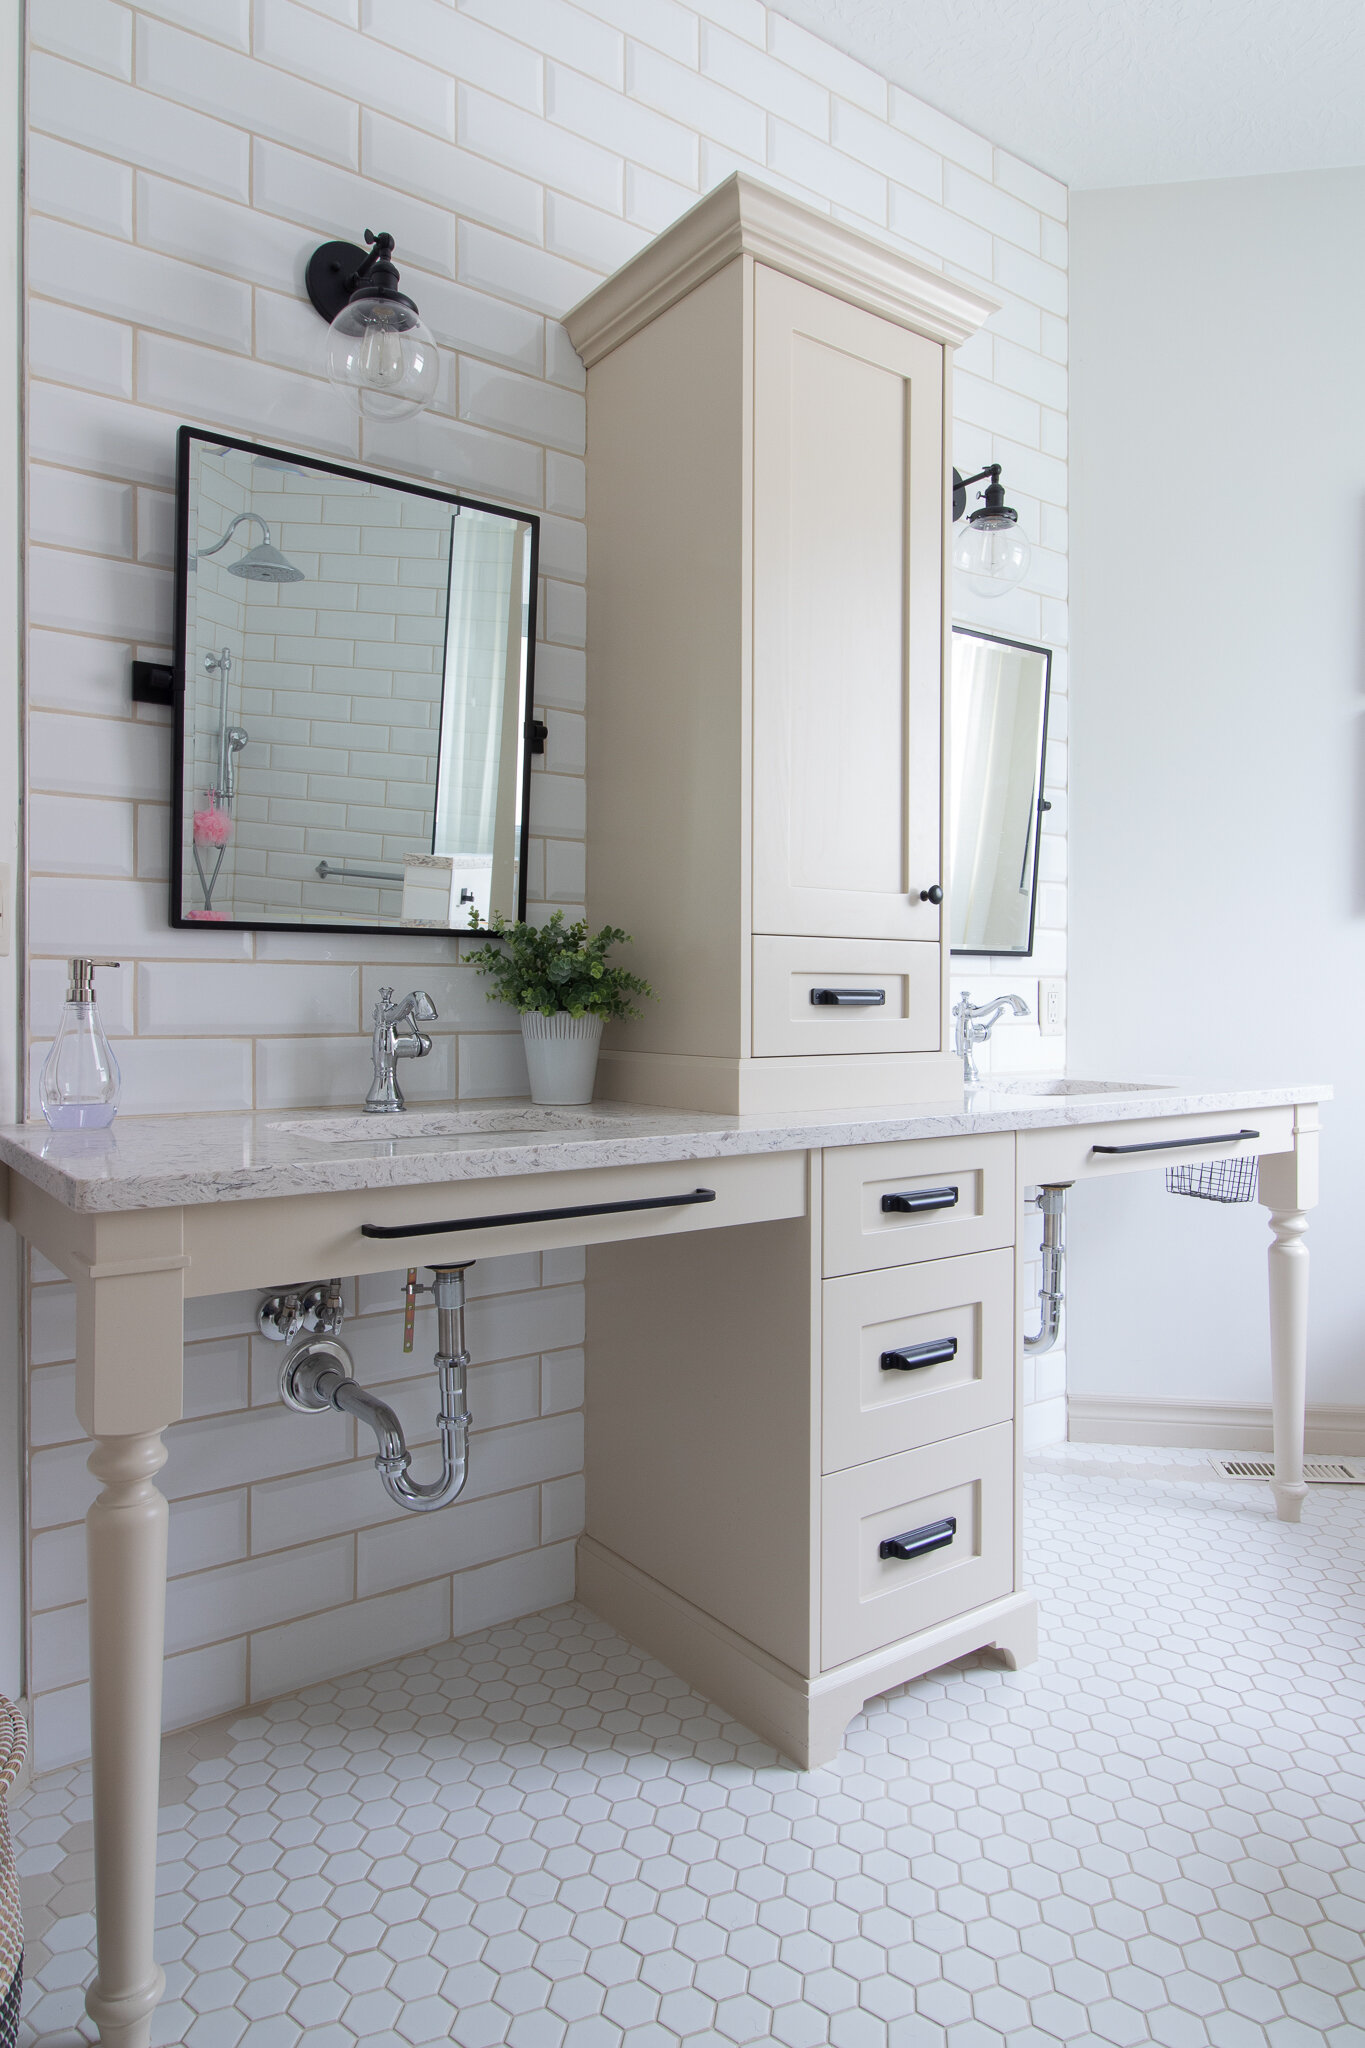 Wheelchair friendly bathroom vanity with two sinks, a central cabinet tower, tiled subway wall, beige cabinetry and quartz counters, chrome single handle fixtures, beveling mirrors and black globe light fixtures with hex tile on floor with border